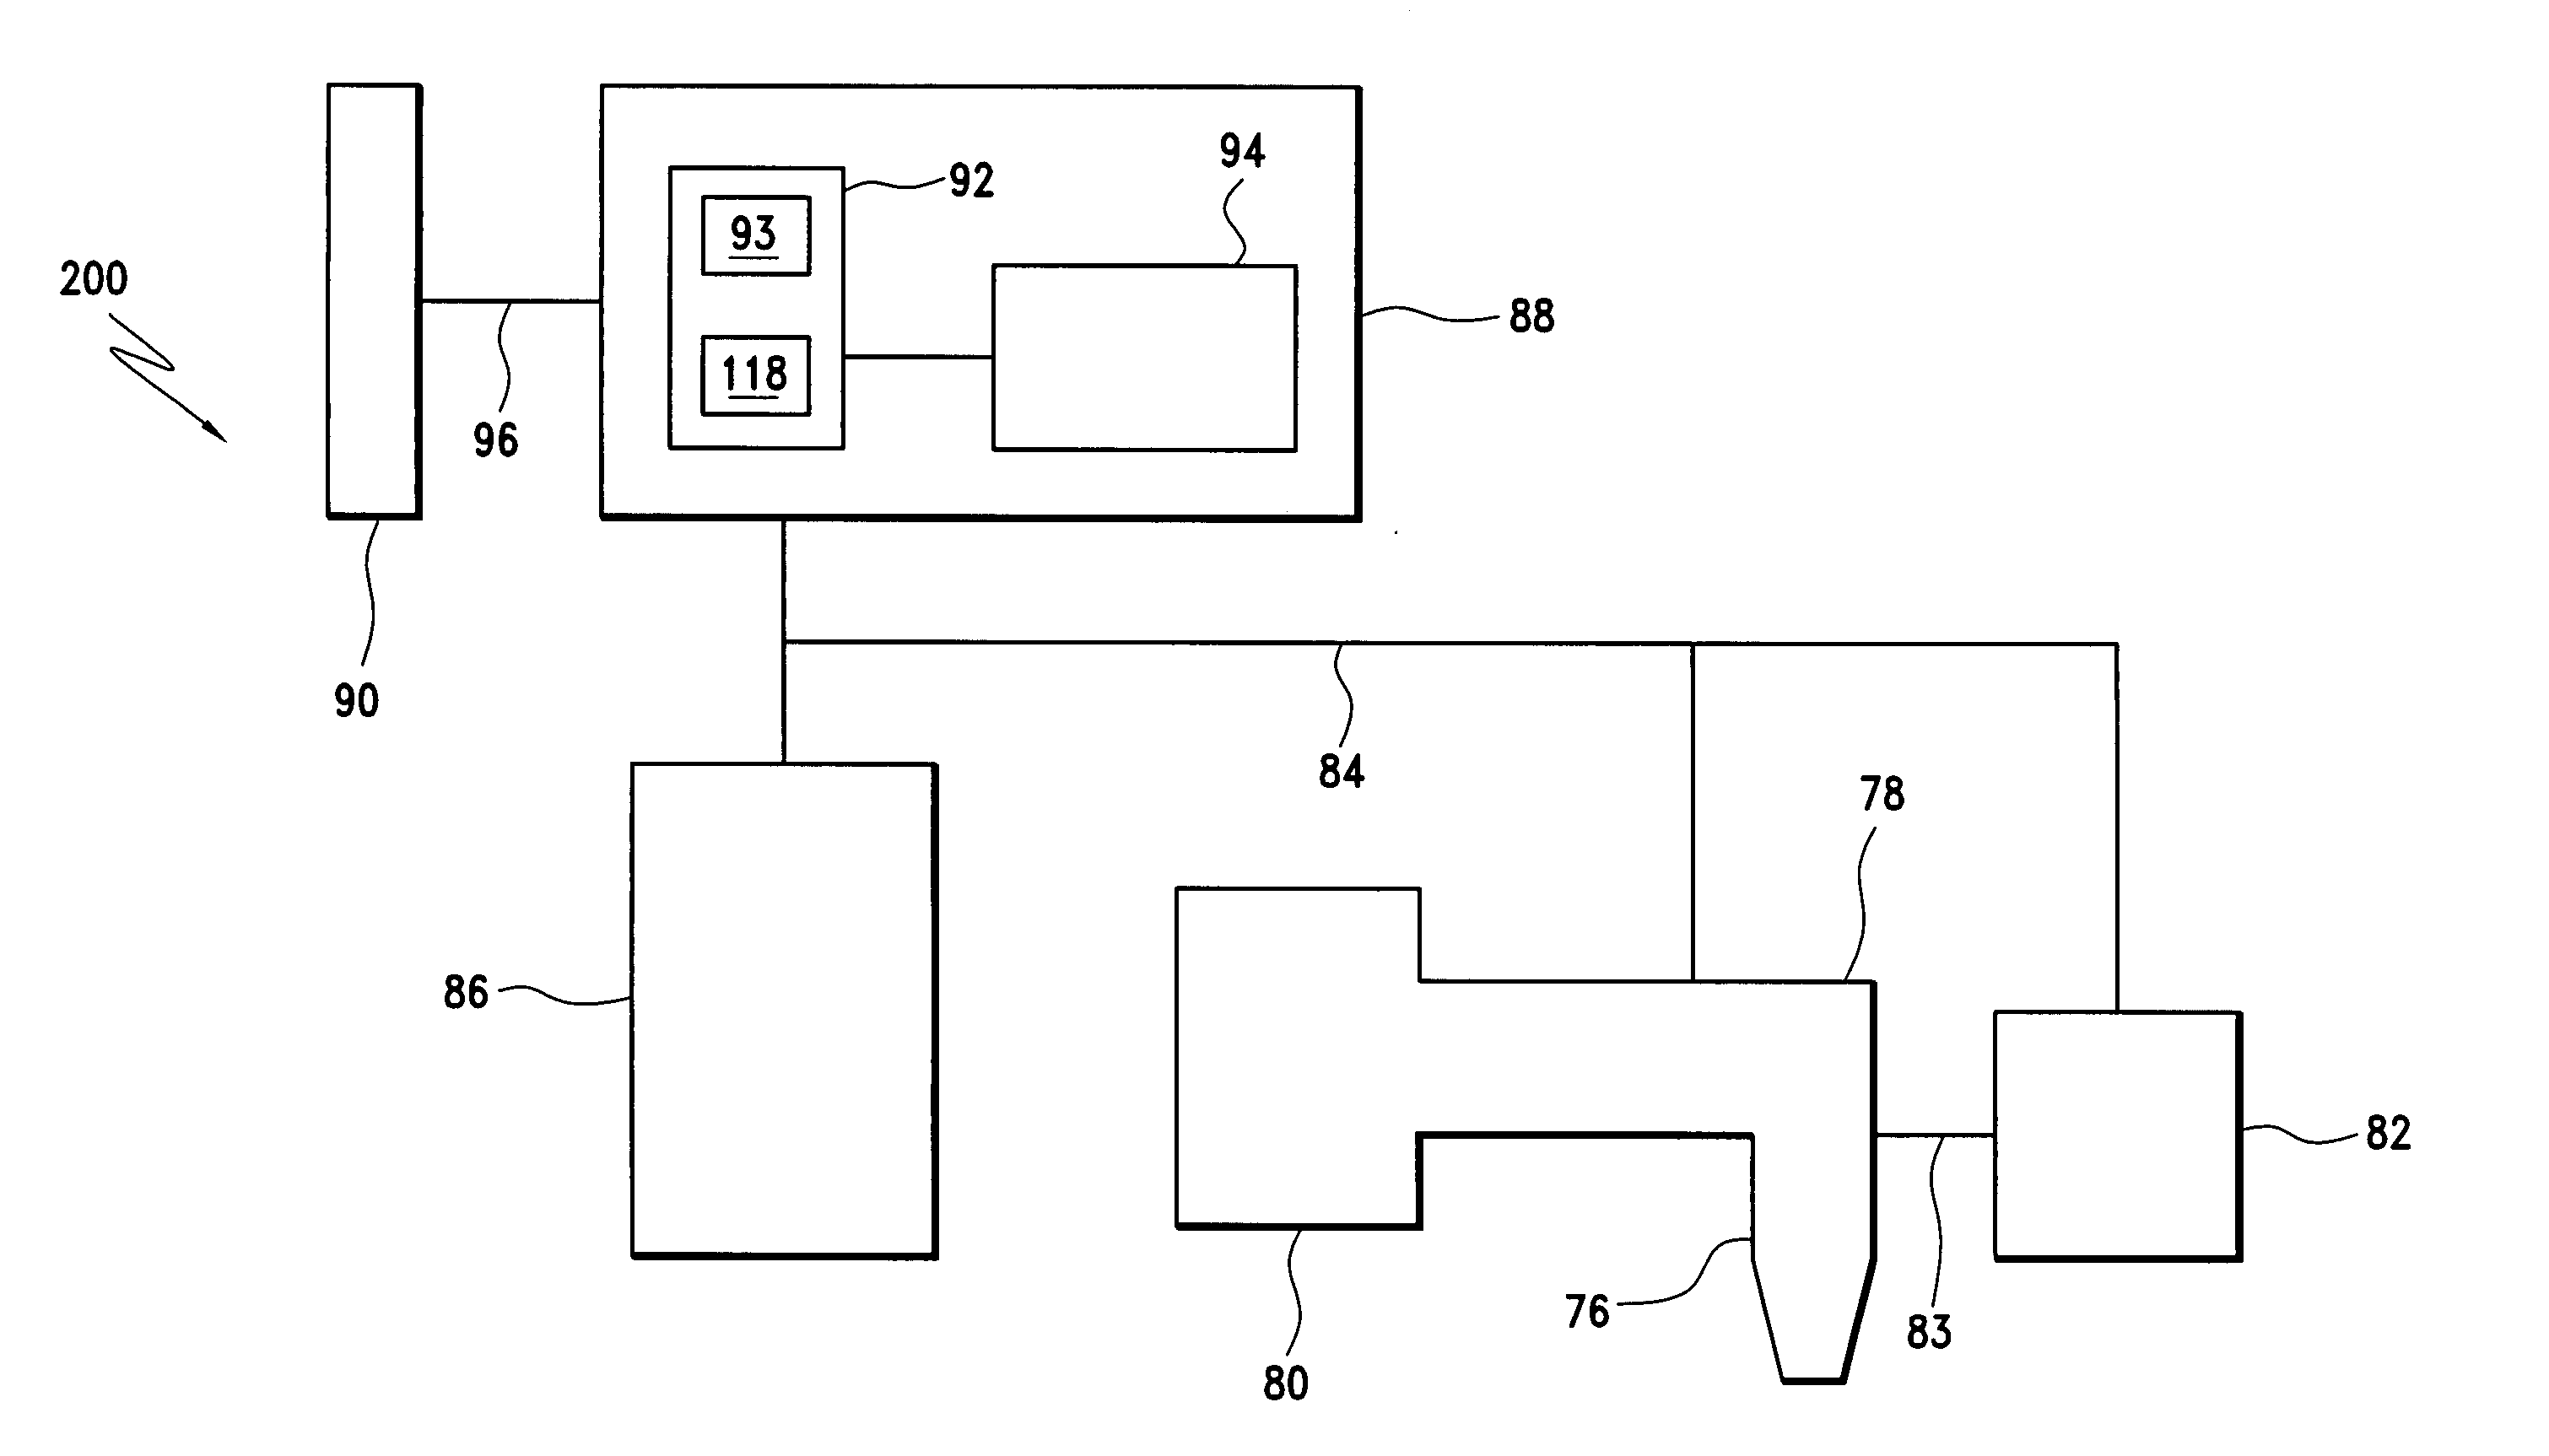 System and process for manufacturing custom electronics by combining traditional electronics with printable electronics